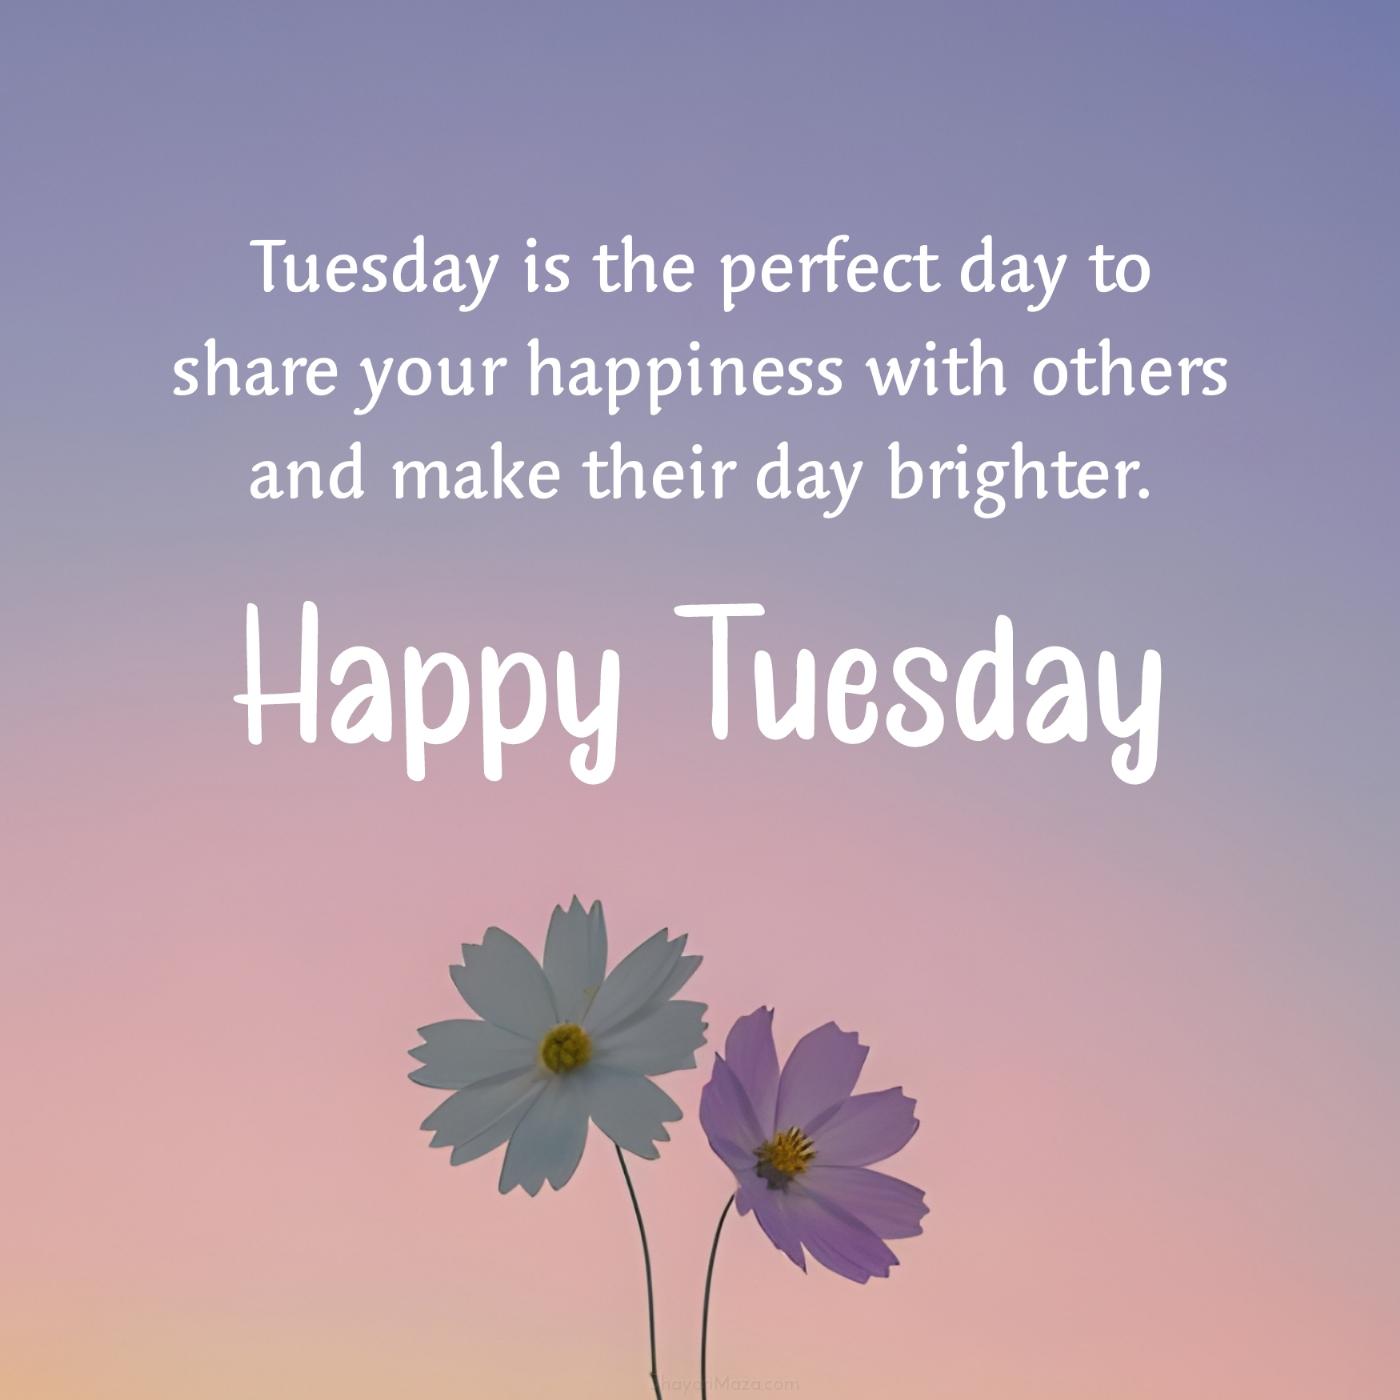 Tuesday is the perfect day to share your happiness